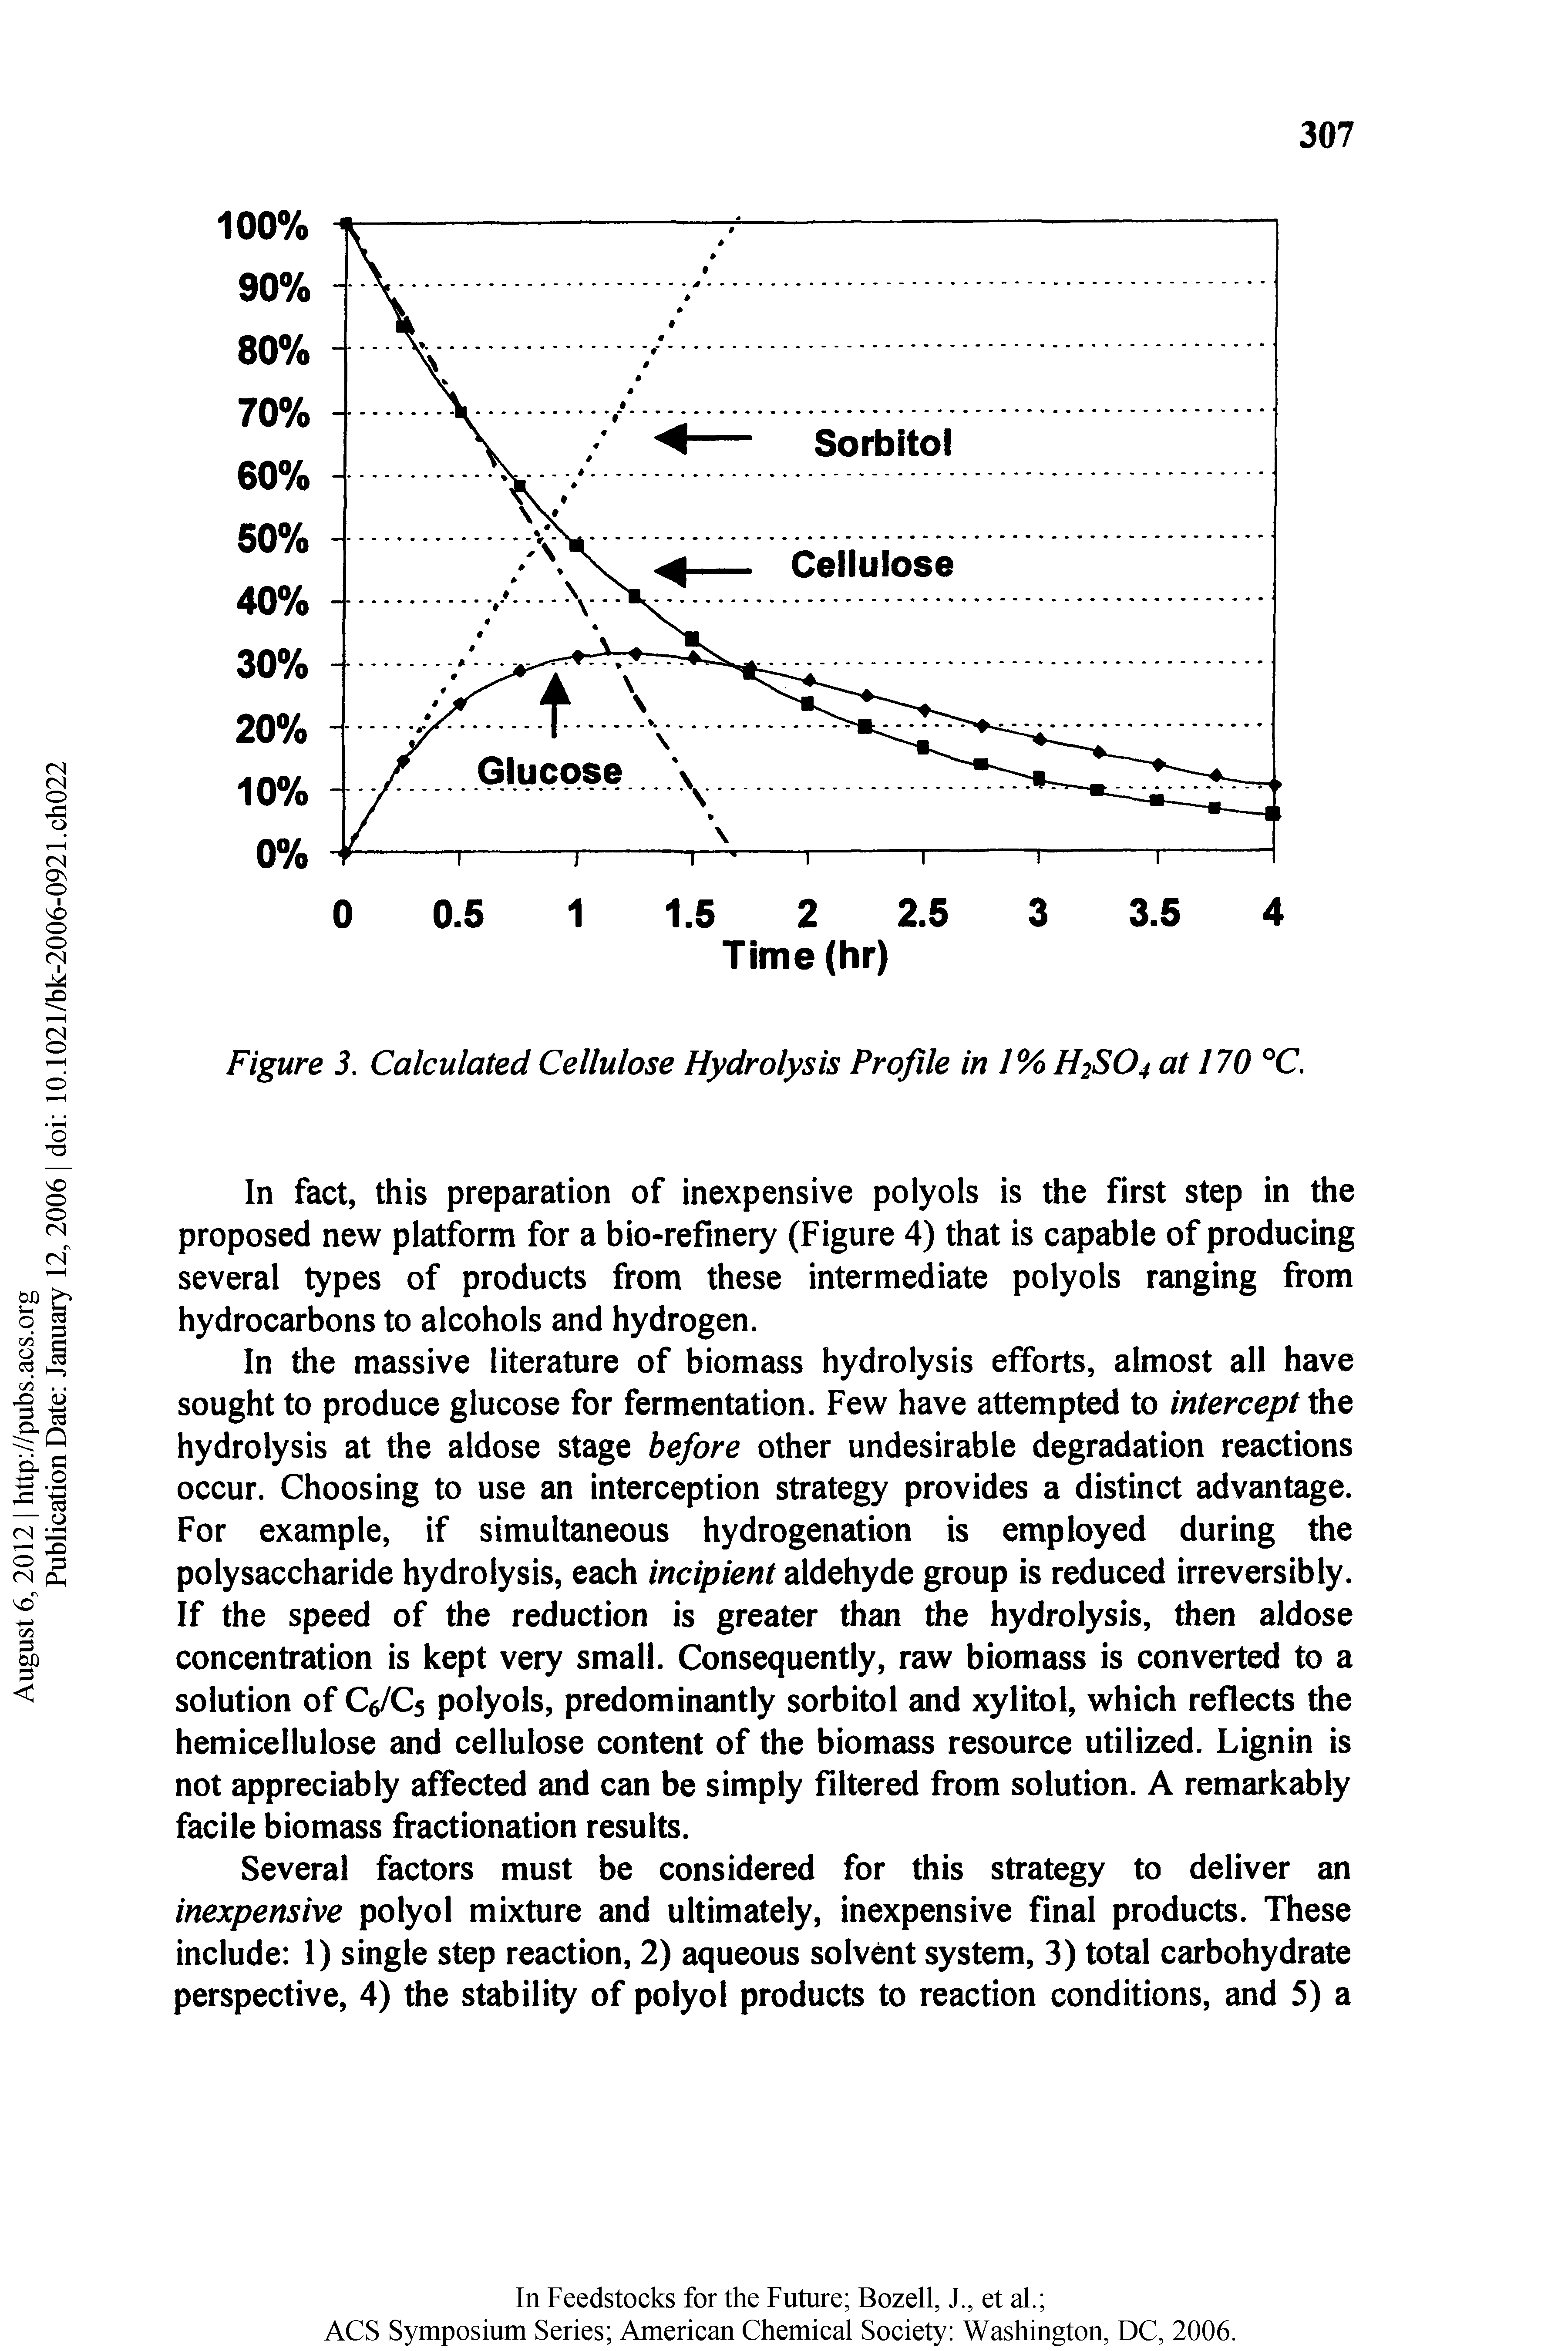 Figure 3. Calculated Cellulose Hydrolysis Profile in 1% H2SO4 at 170 °C.